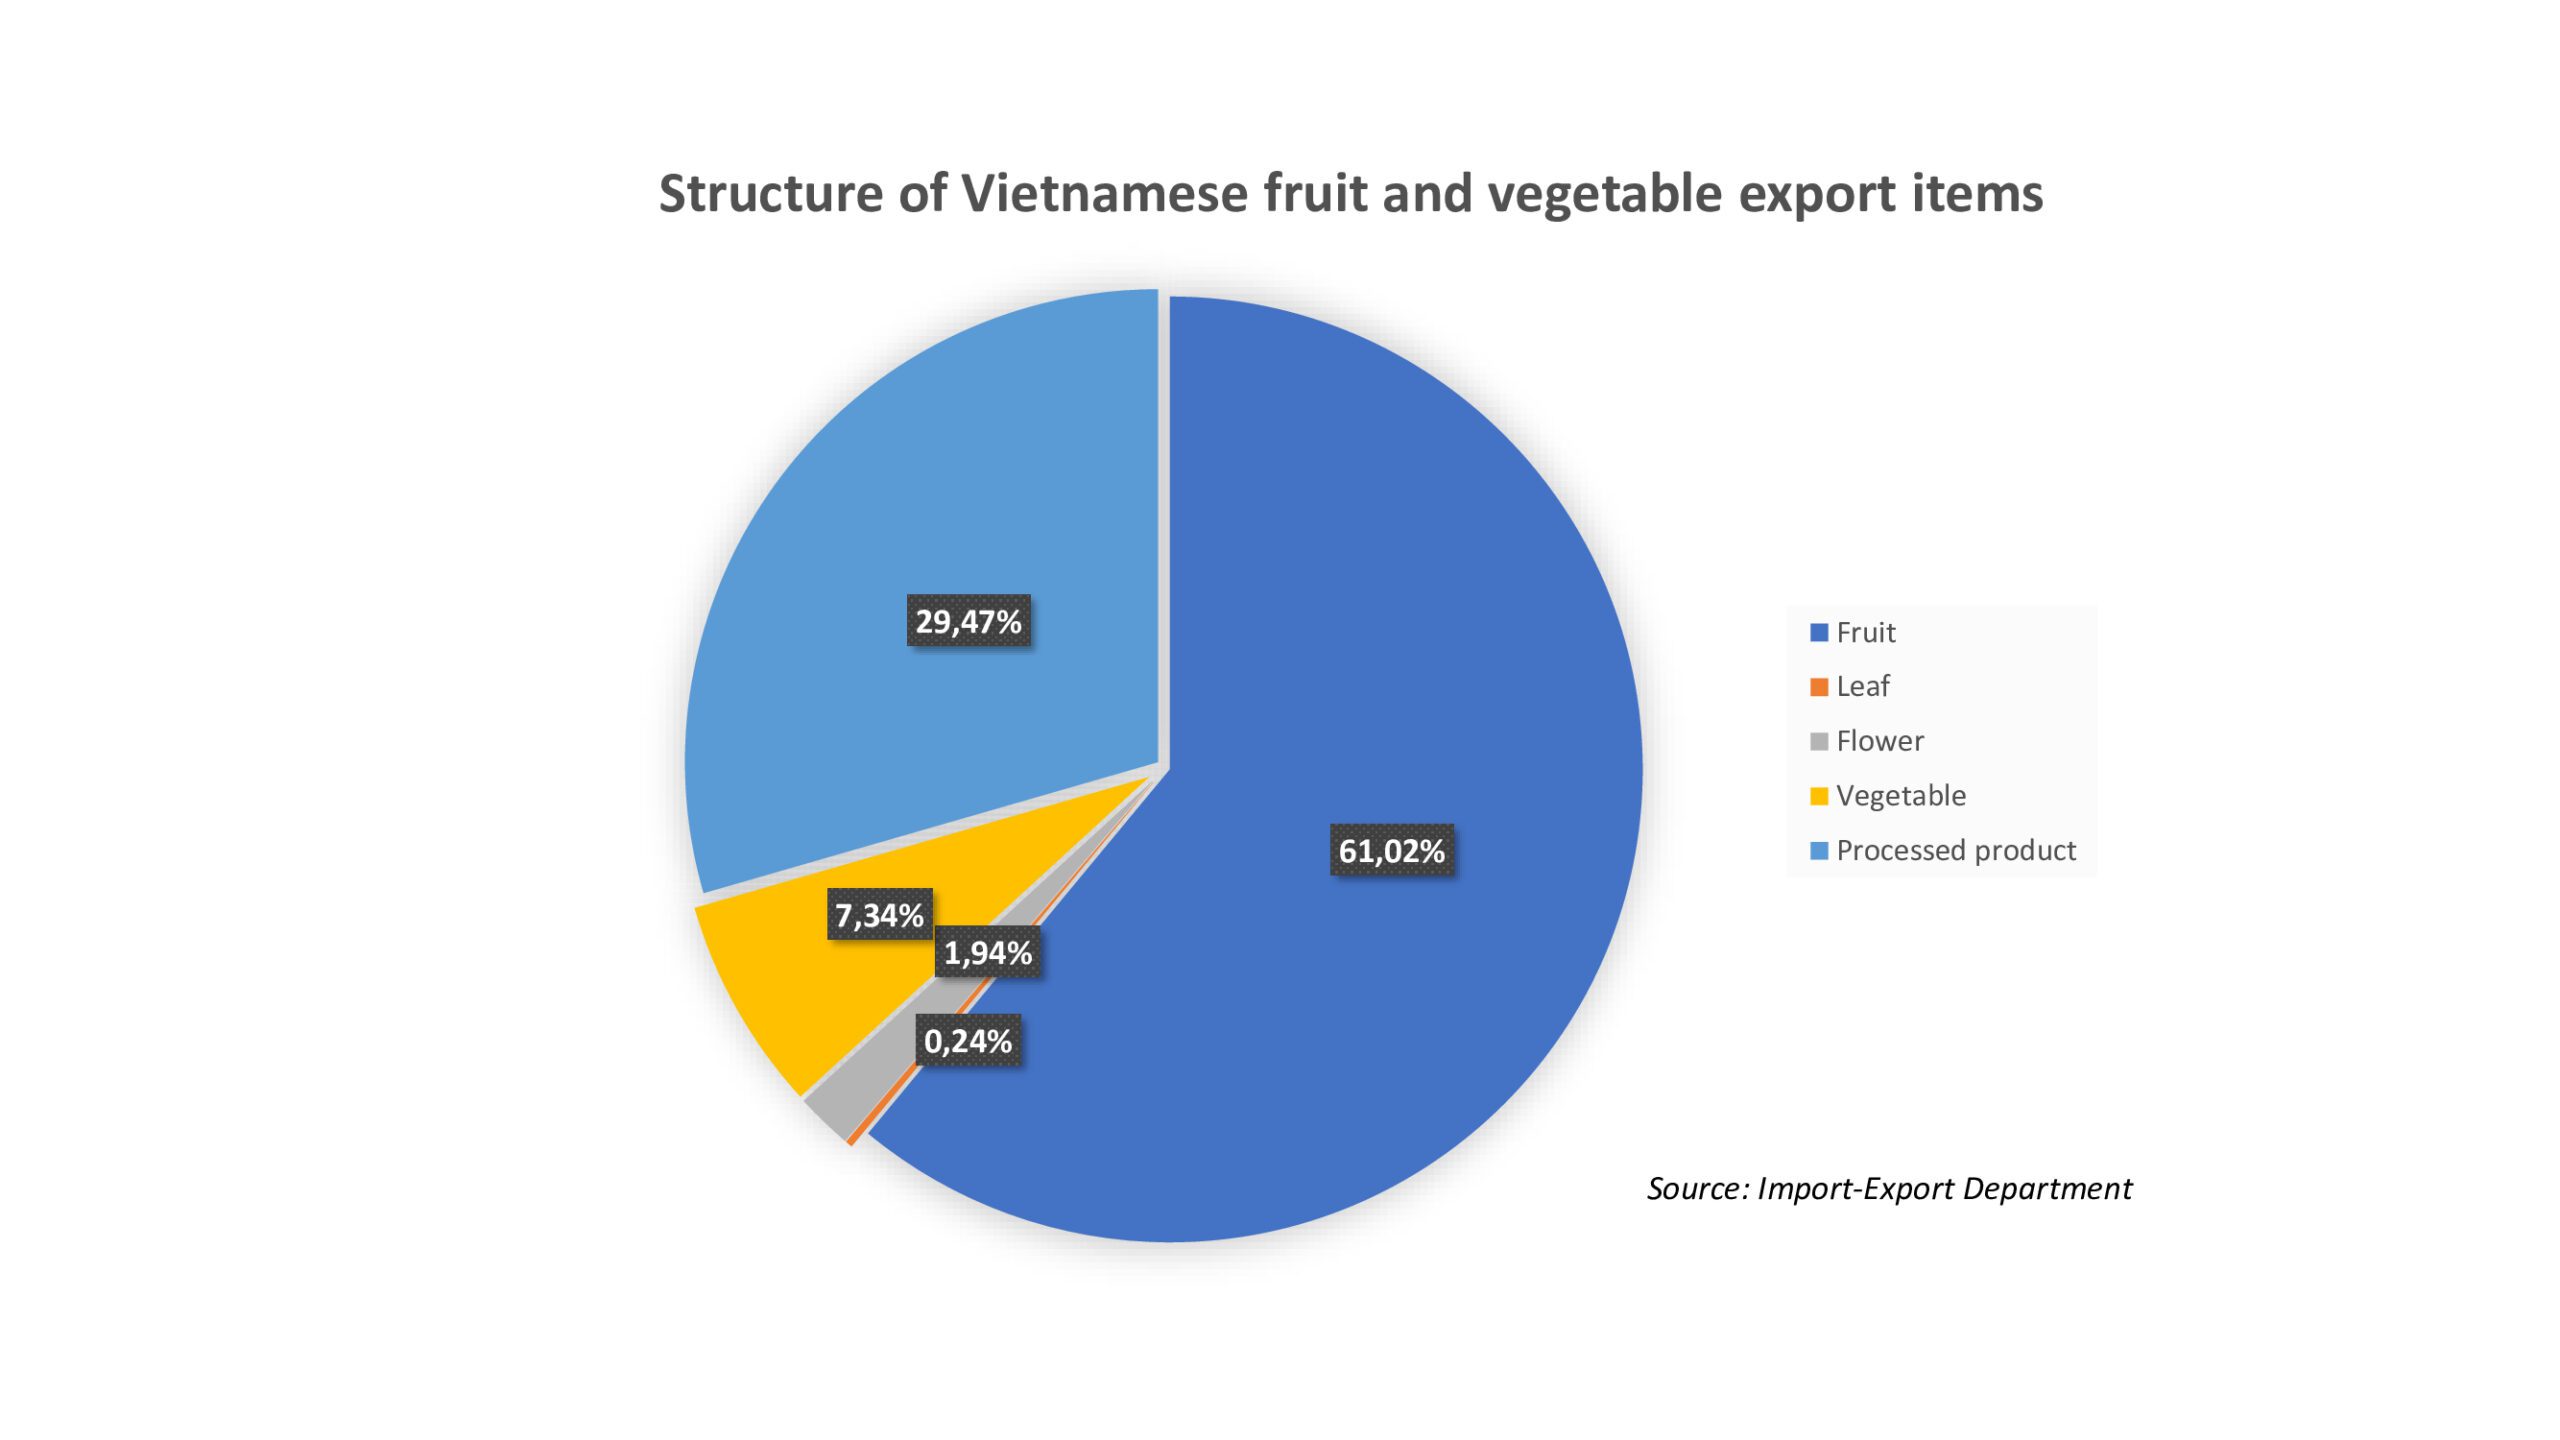 Global processed fruit and vegetable product structure